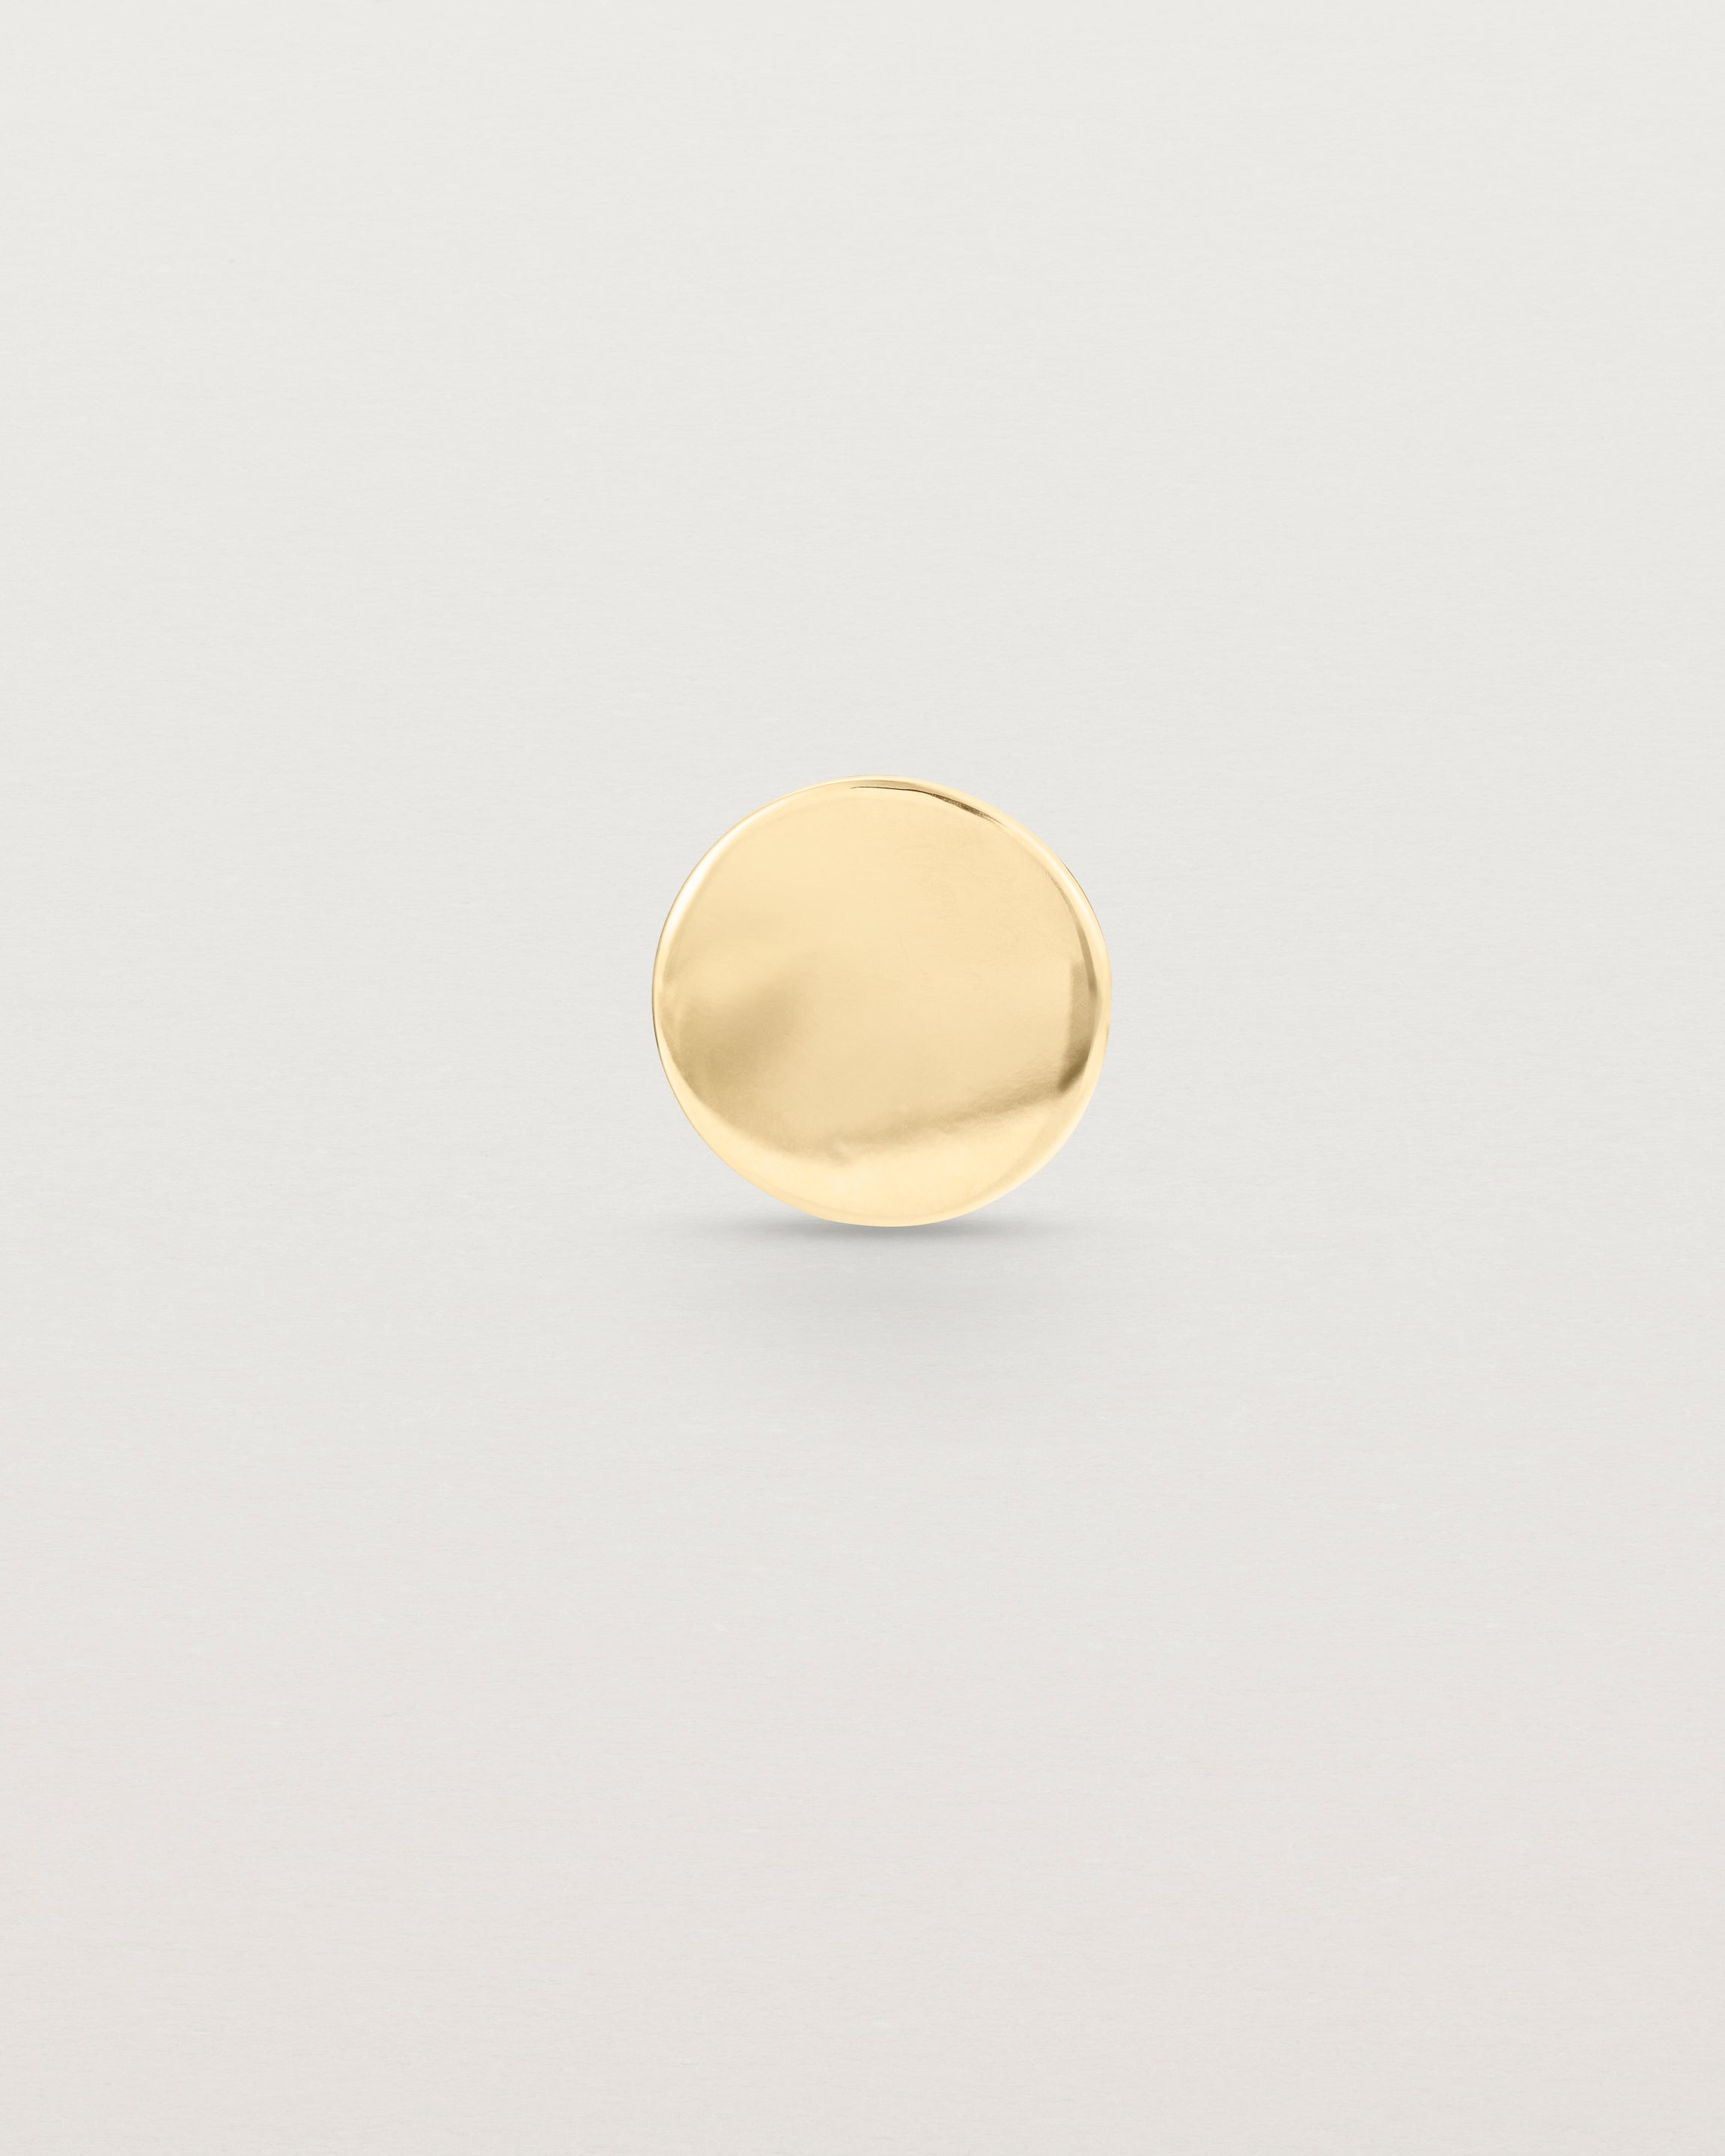 A round polished yellow gold lapel pin